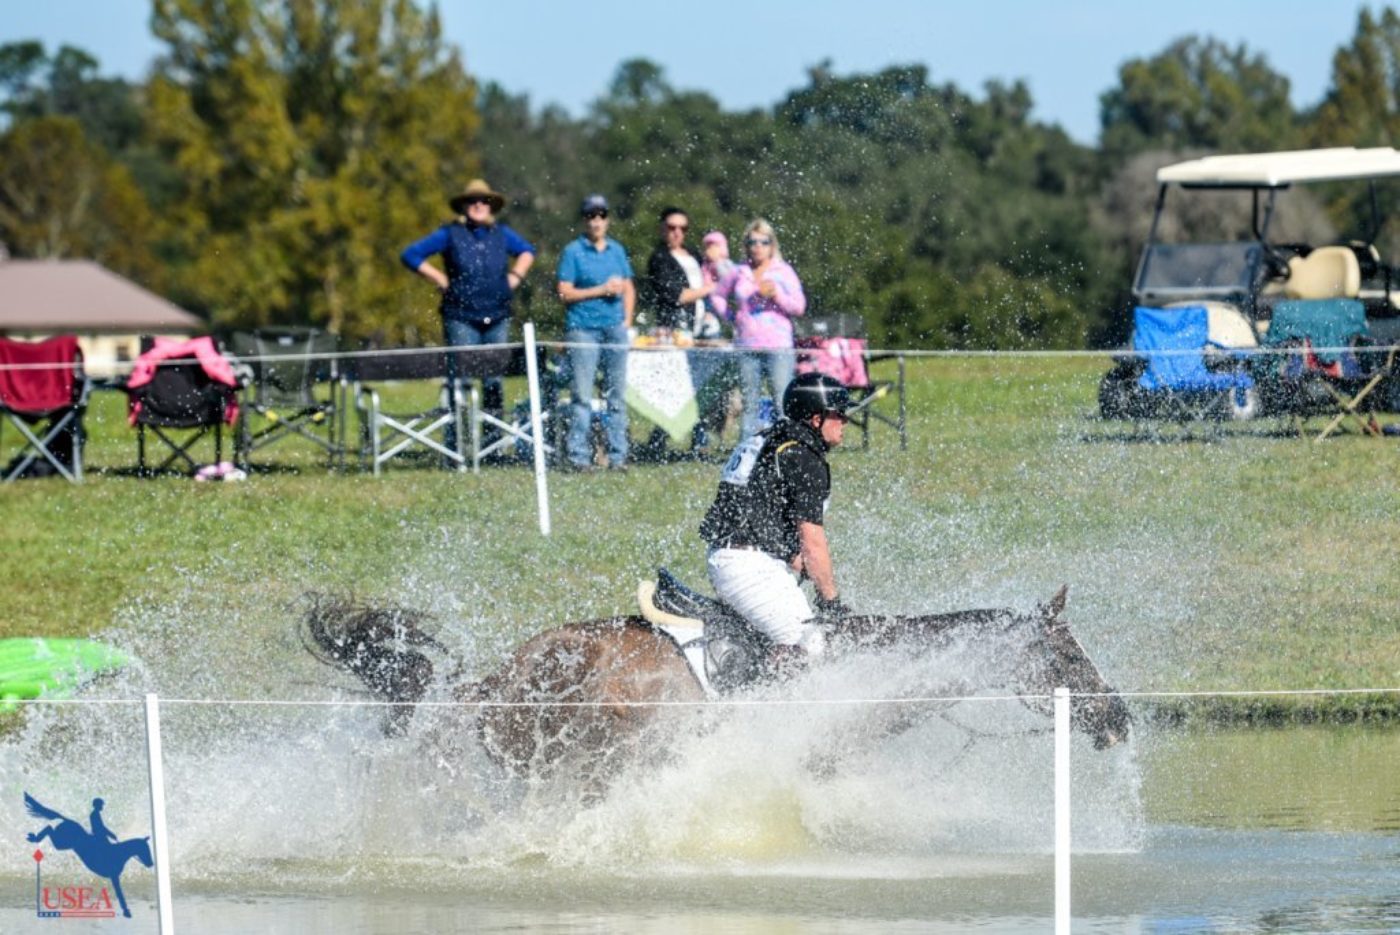 Don't worry - they stuck the landing! USEA/Leslie Mintz Photo.